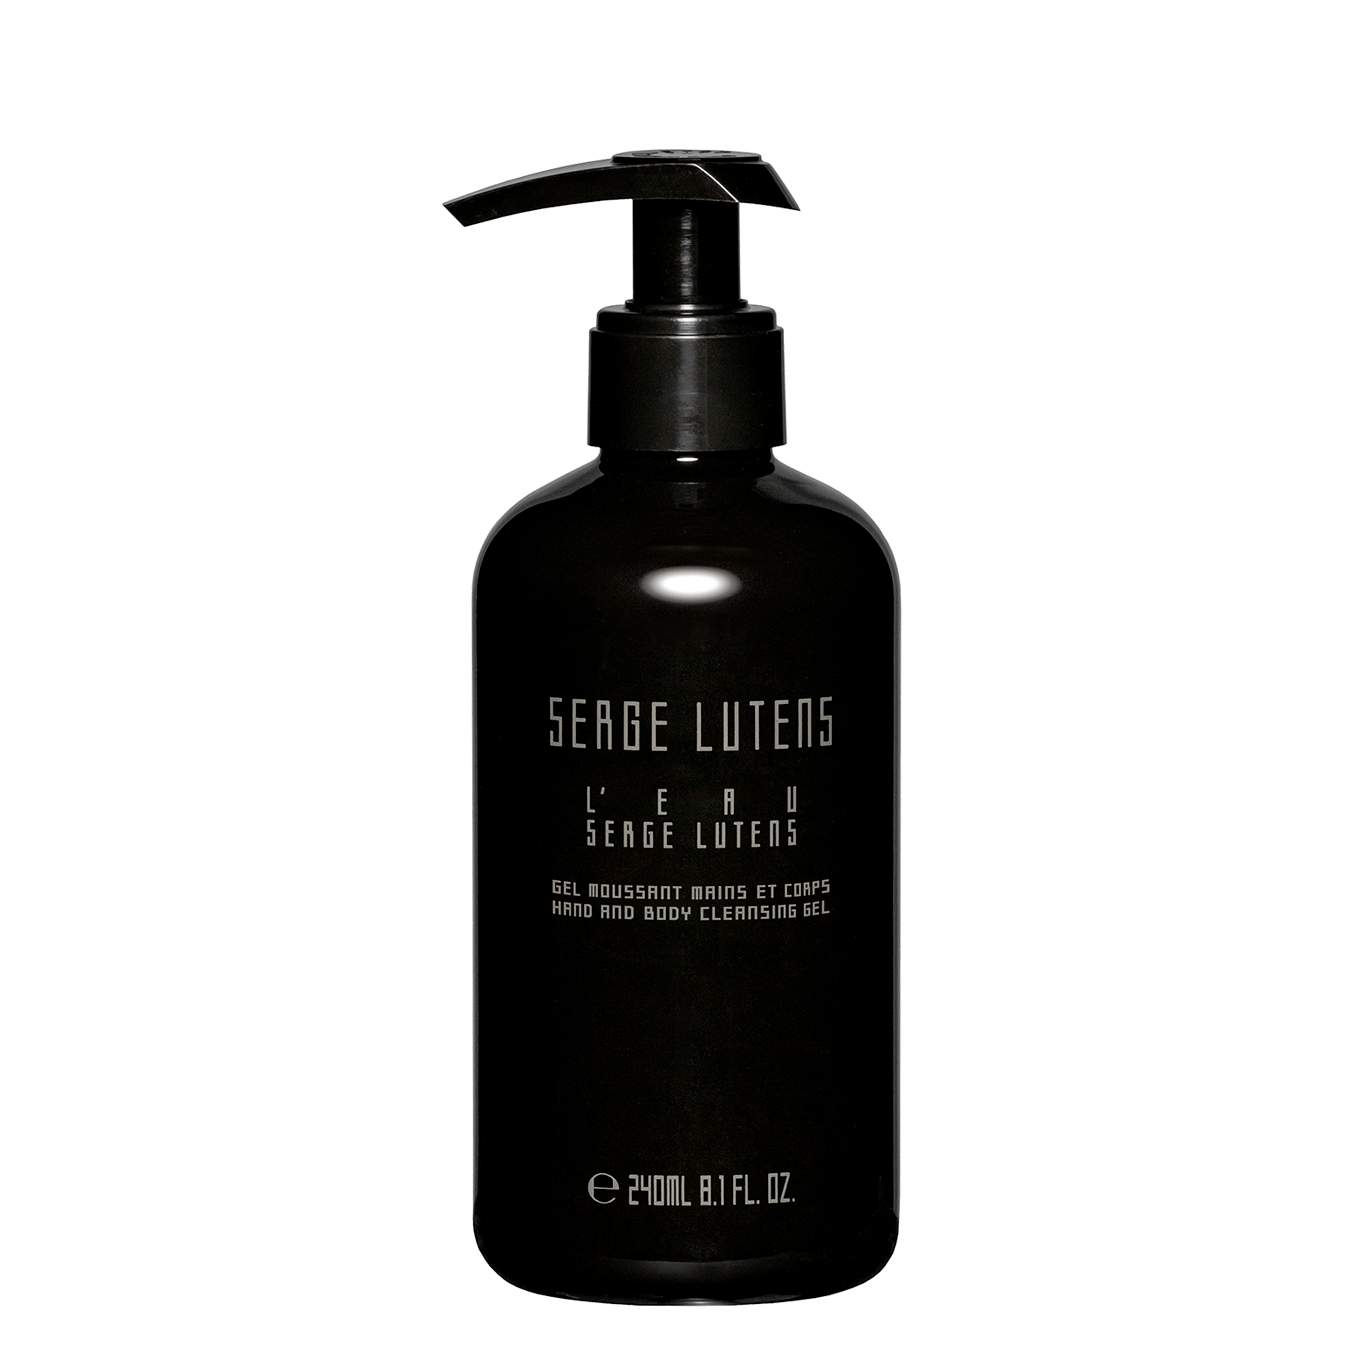 L'eau Serge Lutens Hand and Body Cleansing Gel 240ml